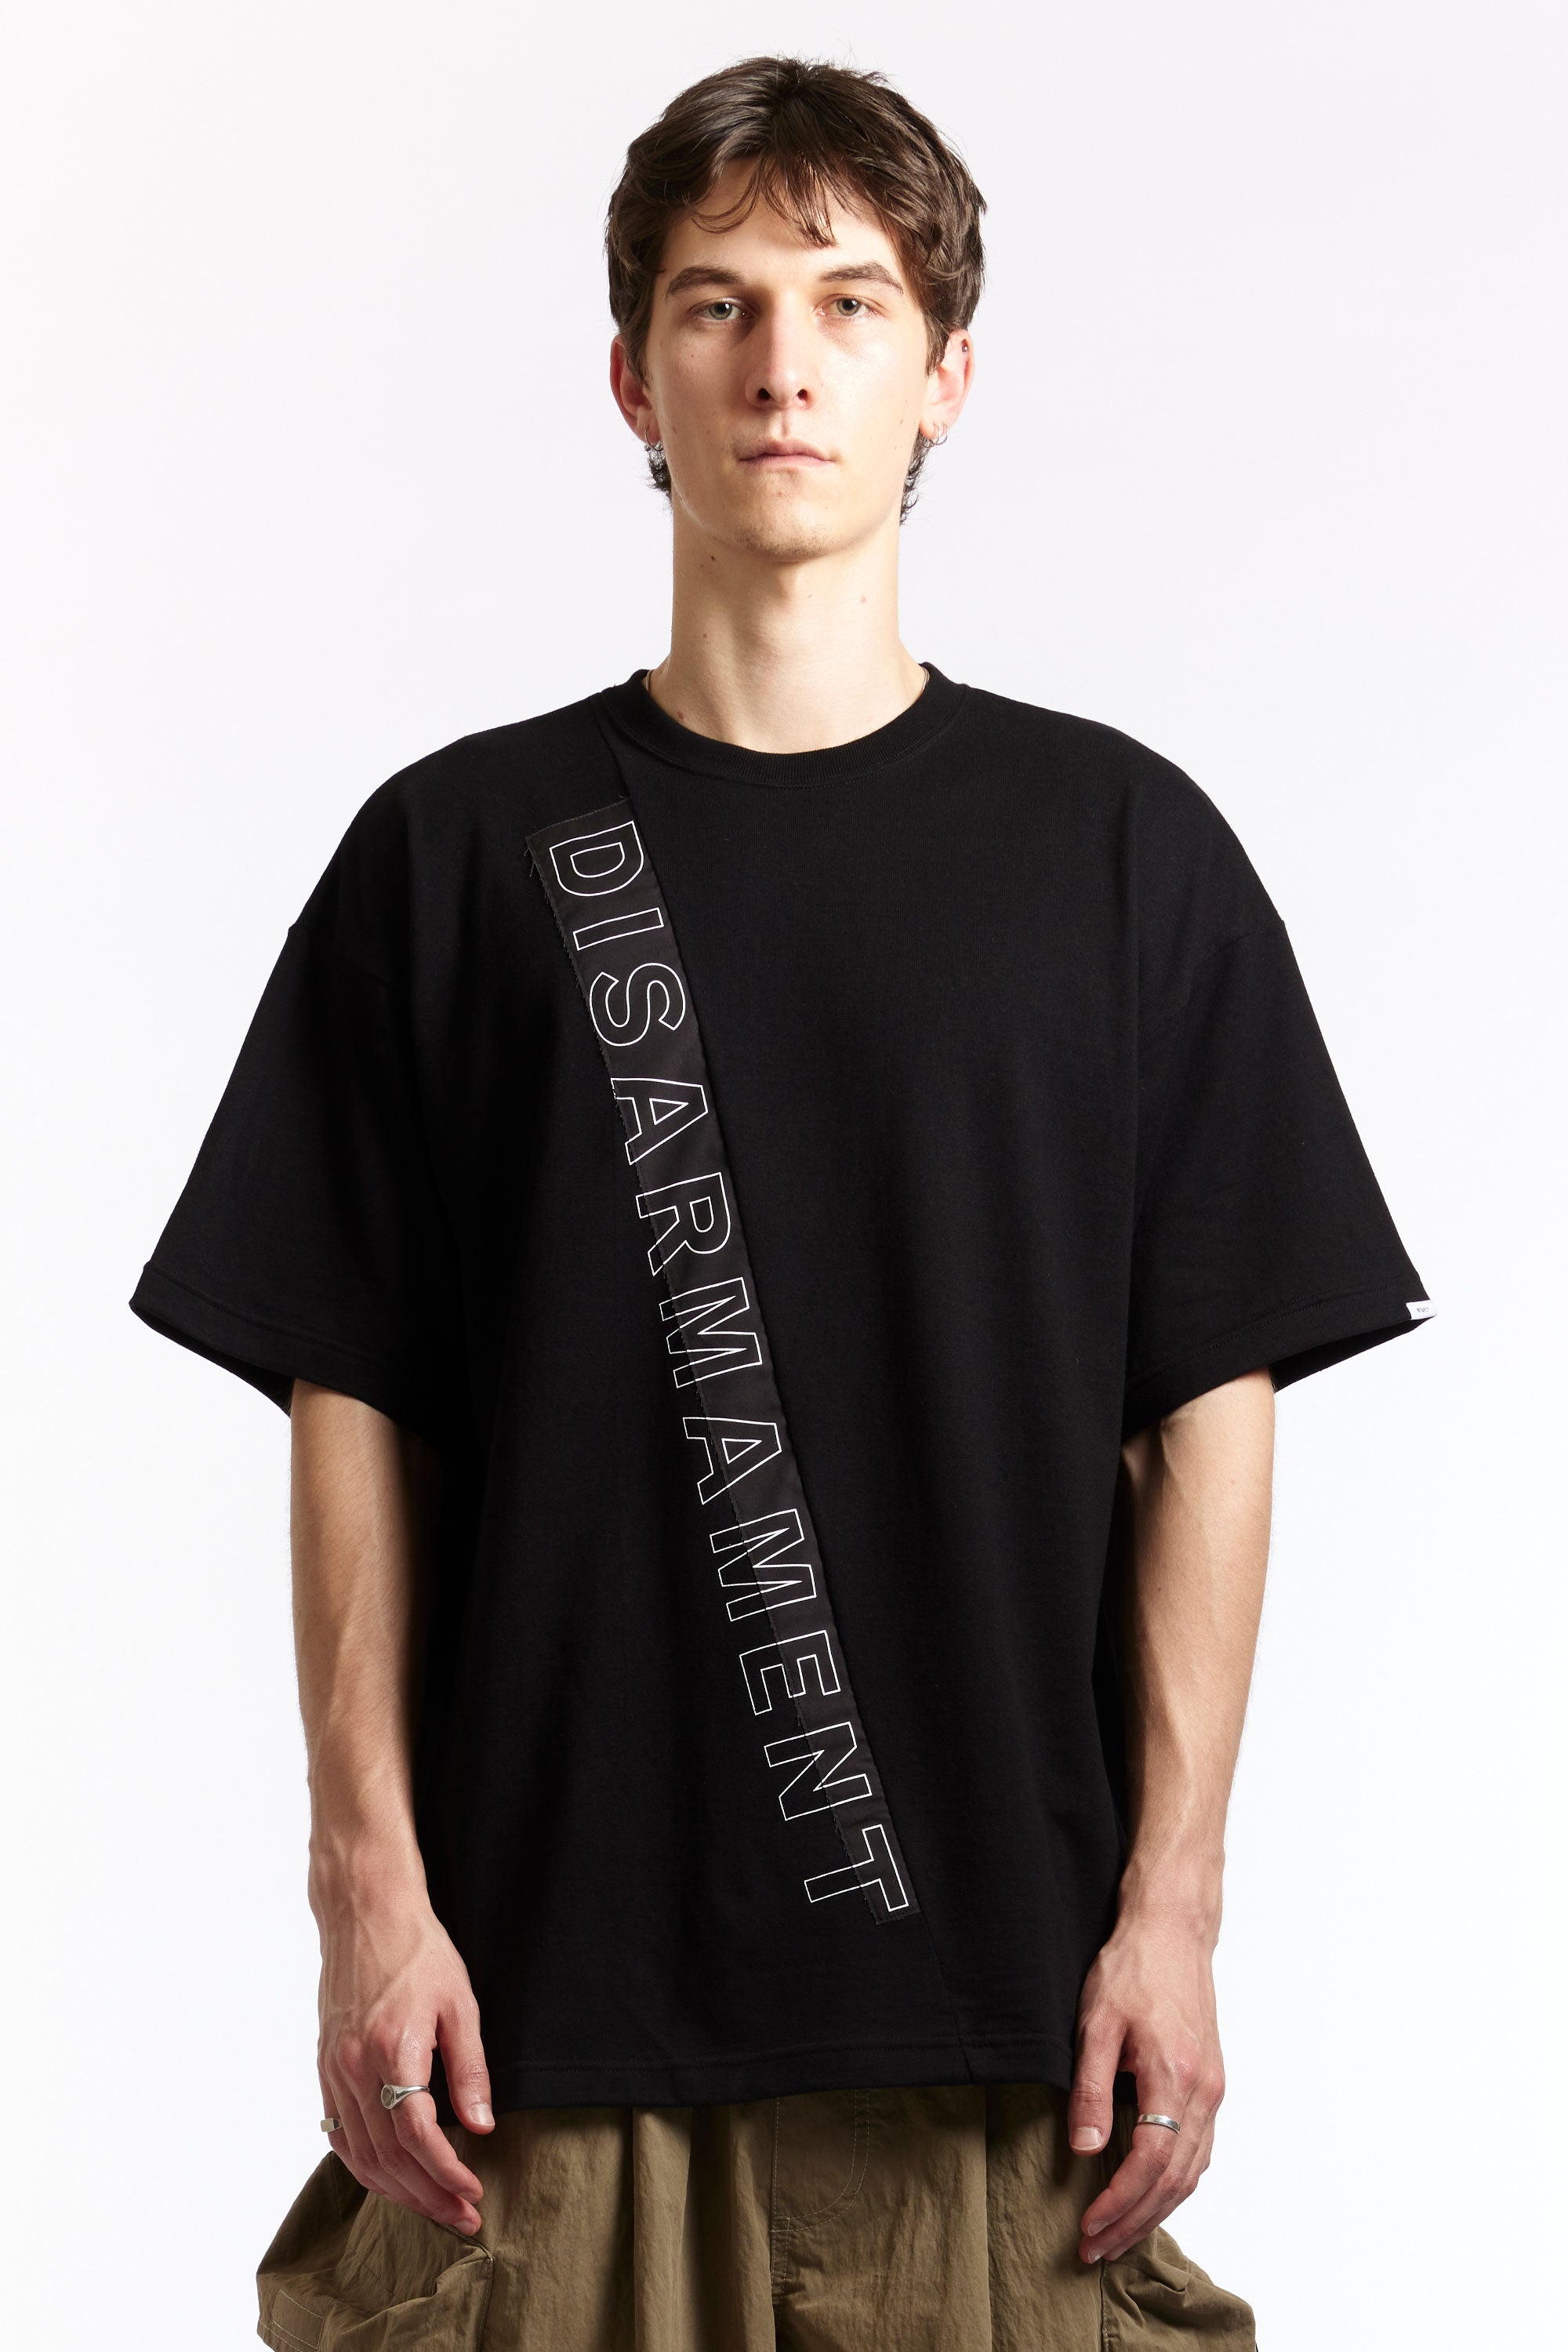 WTAPS - OBJ 01 COTTON CONTAINING LS – P.A.M. (Perks And Mini)